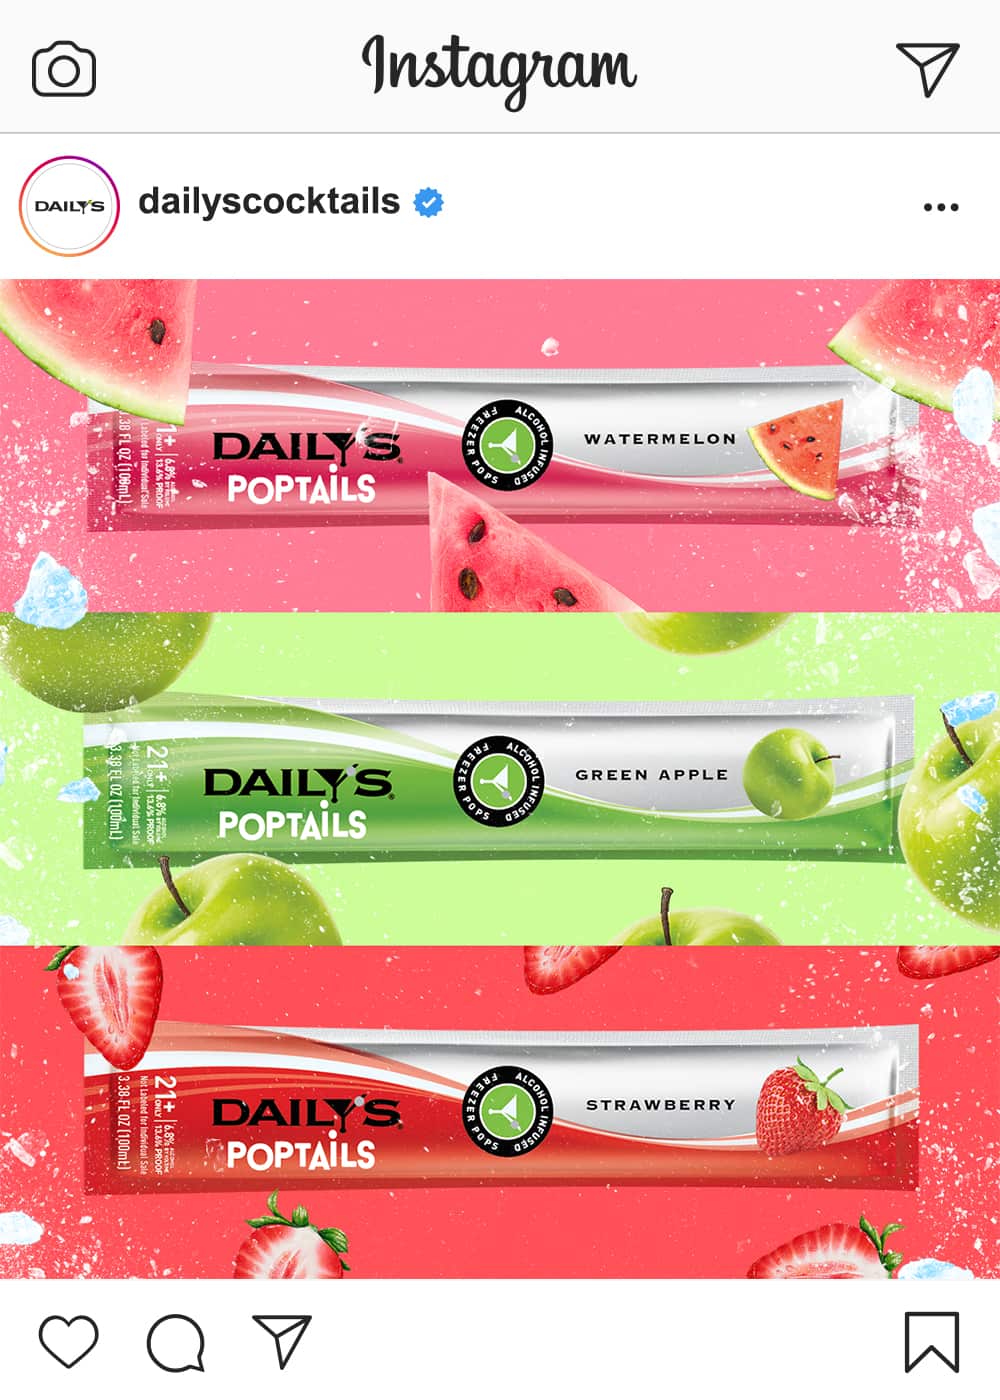 Daily's Poptails tubes with watermelons, apples, and strawberries bursting from the pack in an icy blast